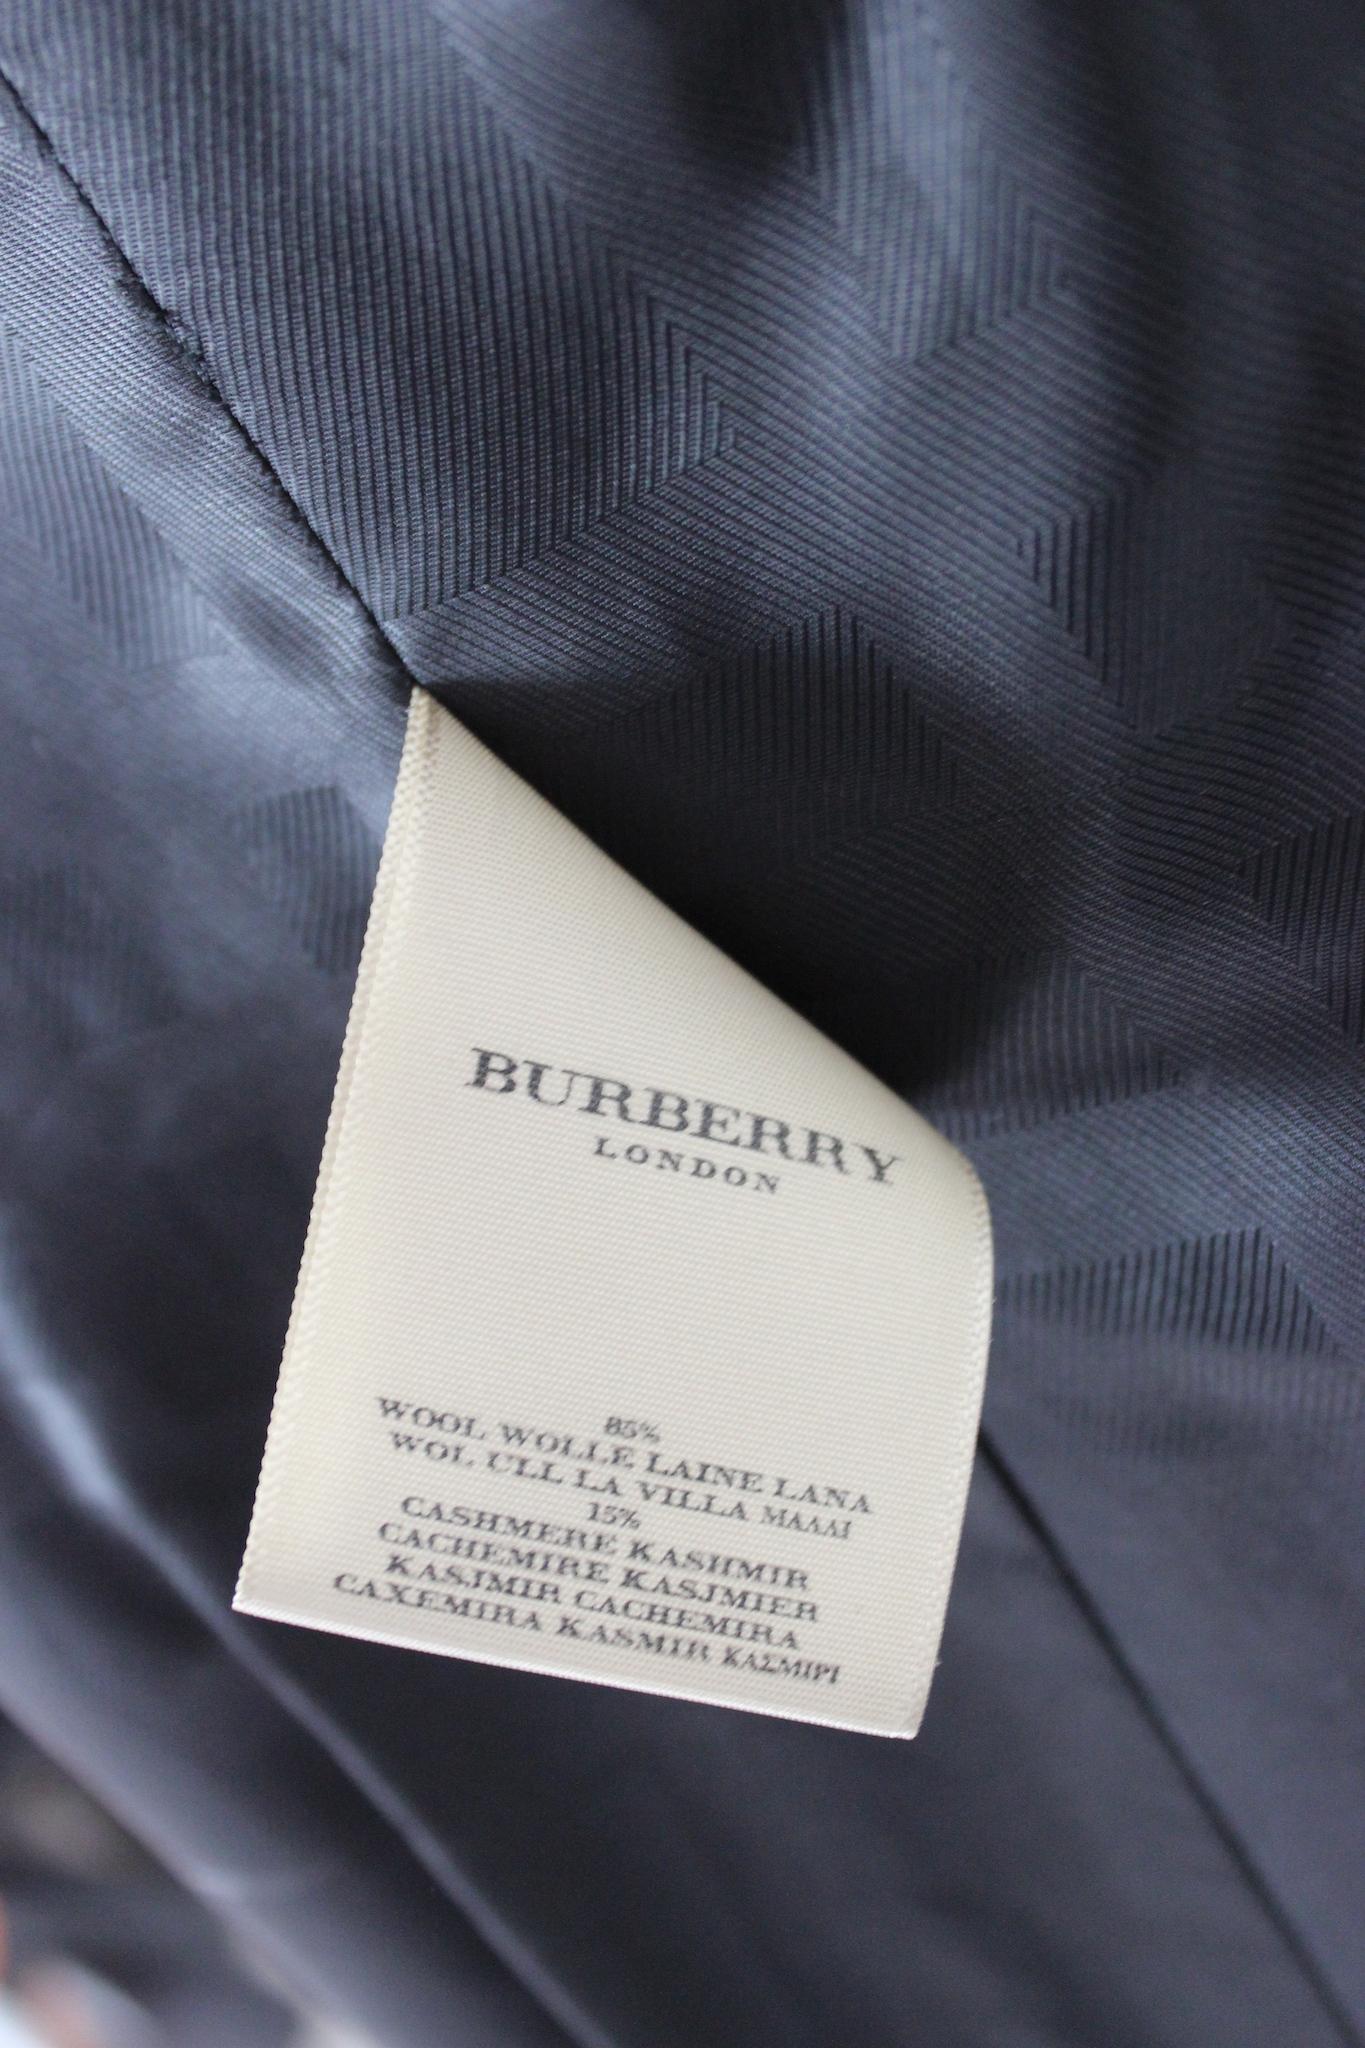 Burberry classic 2000s cashmere coat. Black color, high collar, side pockets. 85% wool, 15% cashmere fabric, fully lined. Made in Italy.

Size: 44 It 10 Us 12 Uk

Shoulder: 44 cm
Bust/Chest: 51cm
Sleeve: 62 cm
Length: 103 cm
